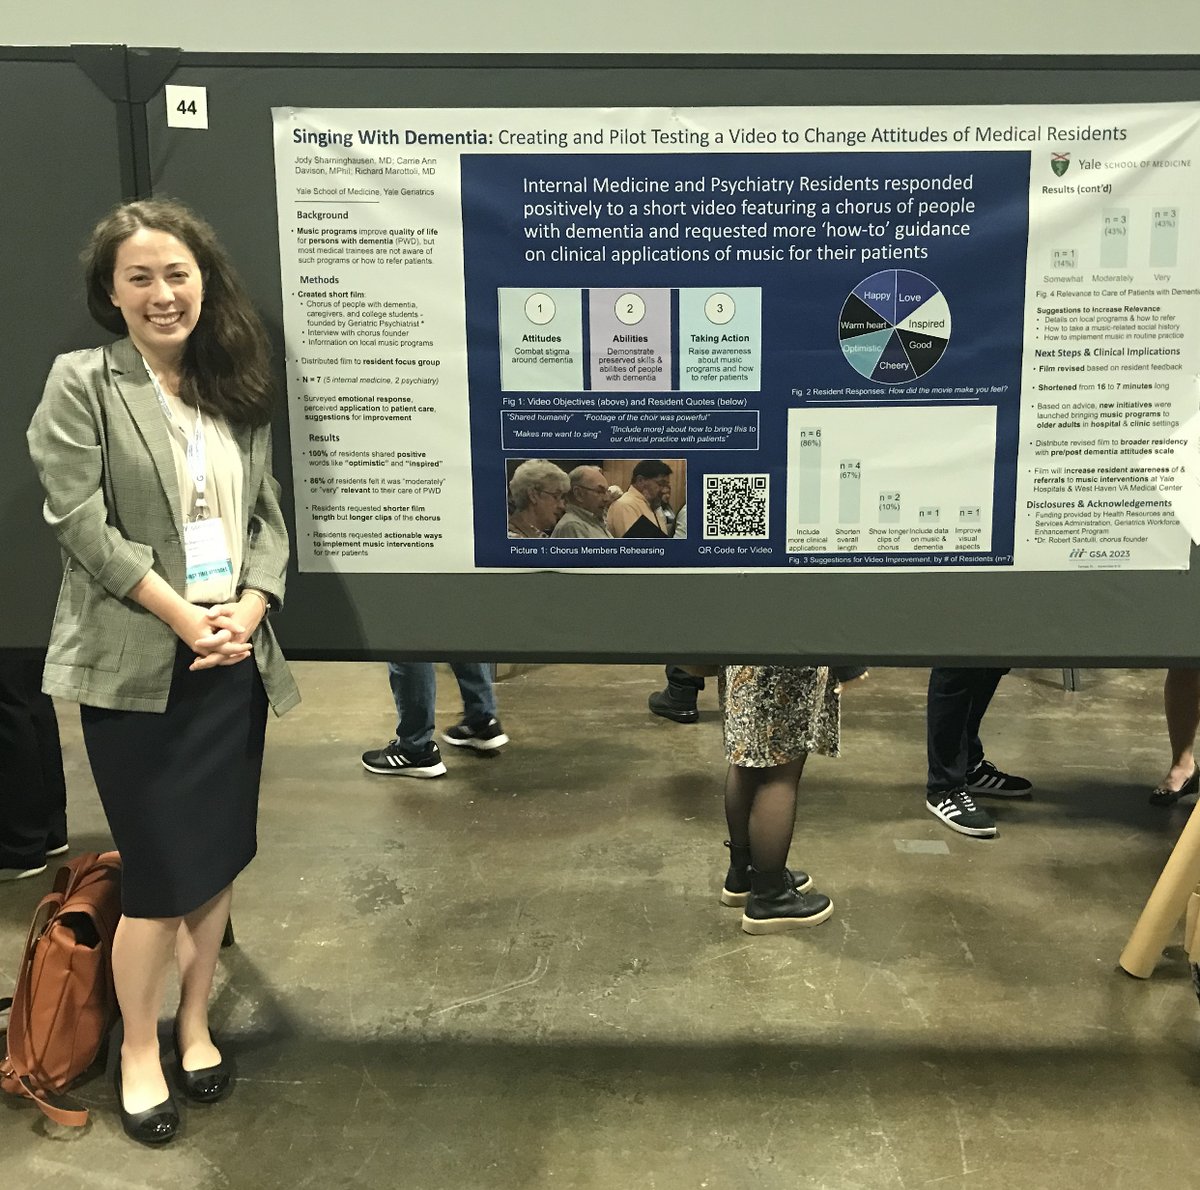 Great time at #GSA2023 in Tampa FL last week where Jody Sharninghausen presented a poster on her project “Singing With Dementia: Creating and Pilot Testing a Video to Change Attitudes of Medical Residents”